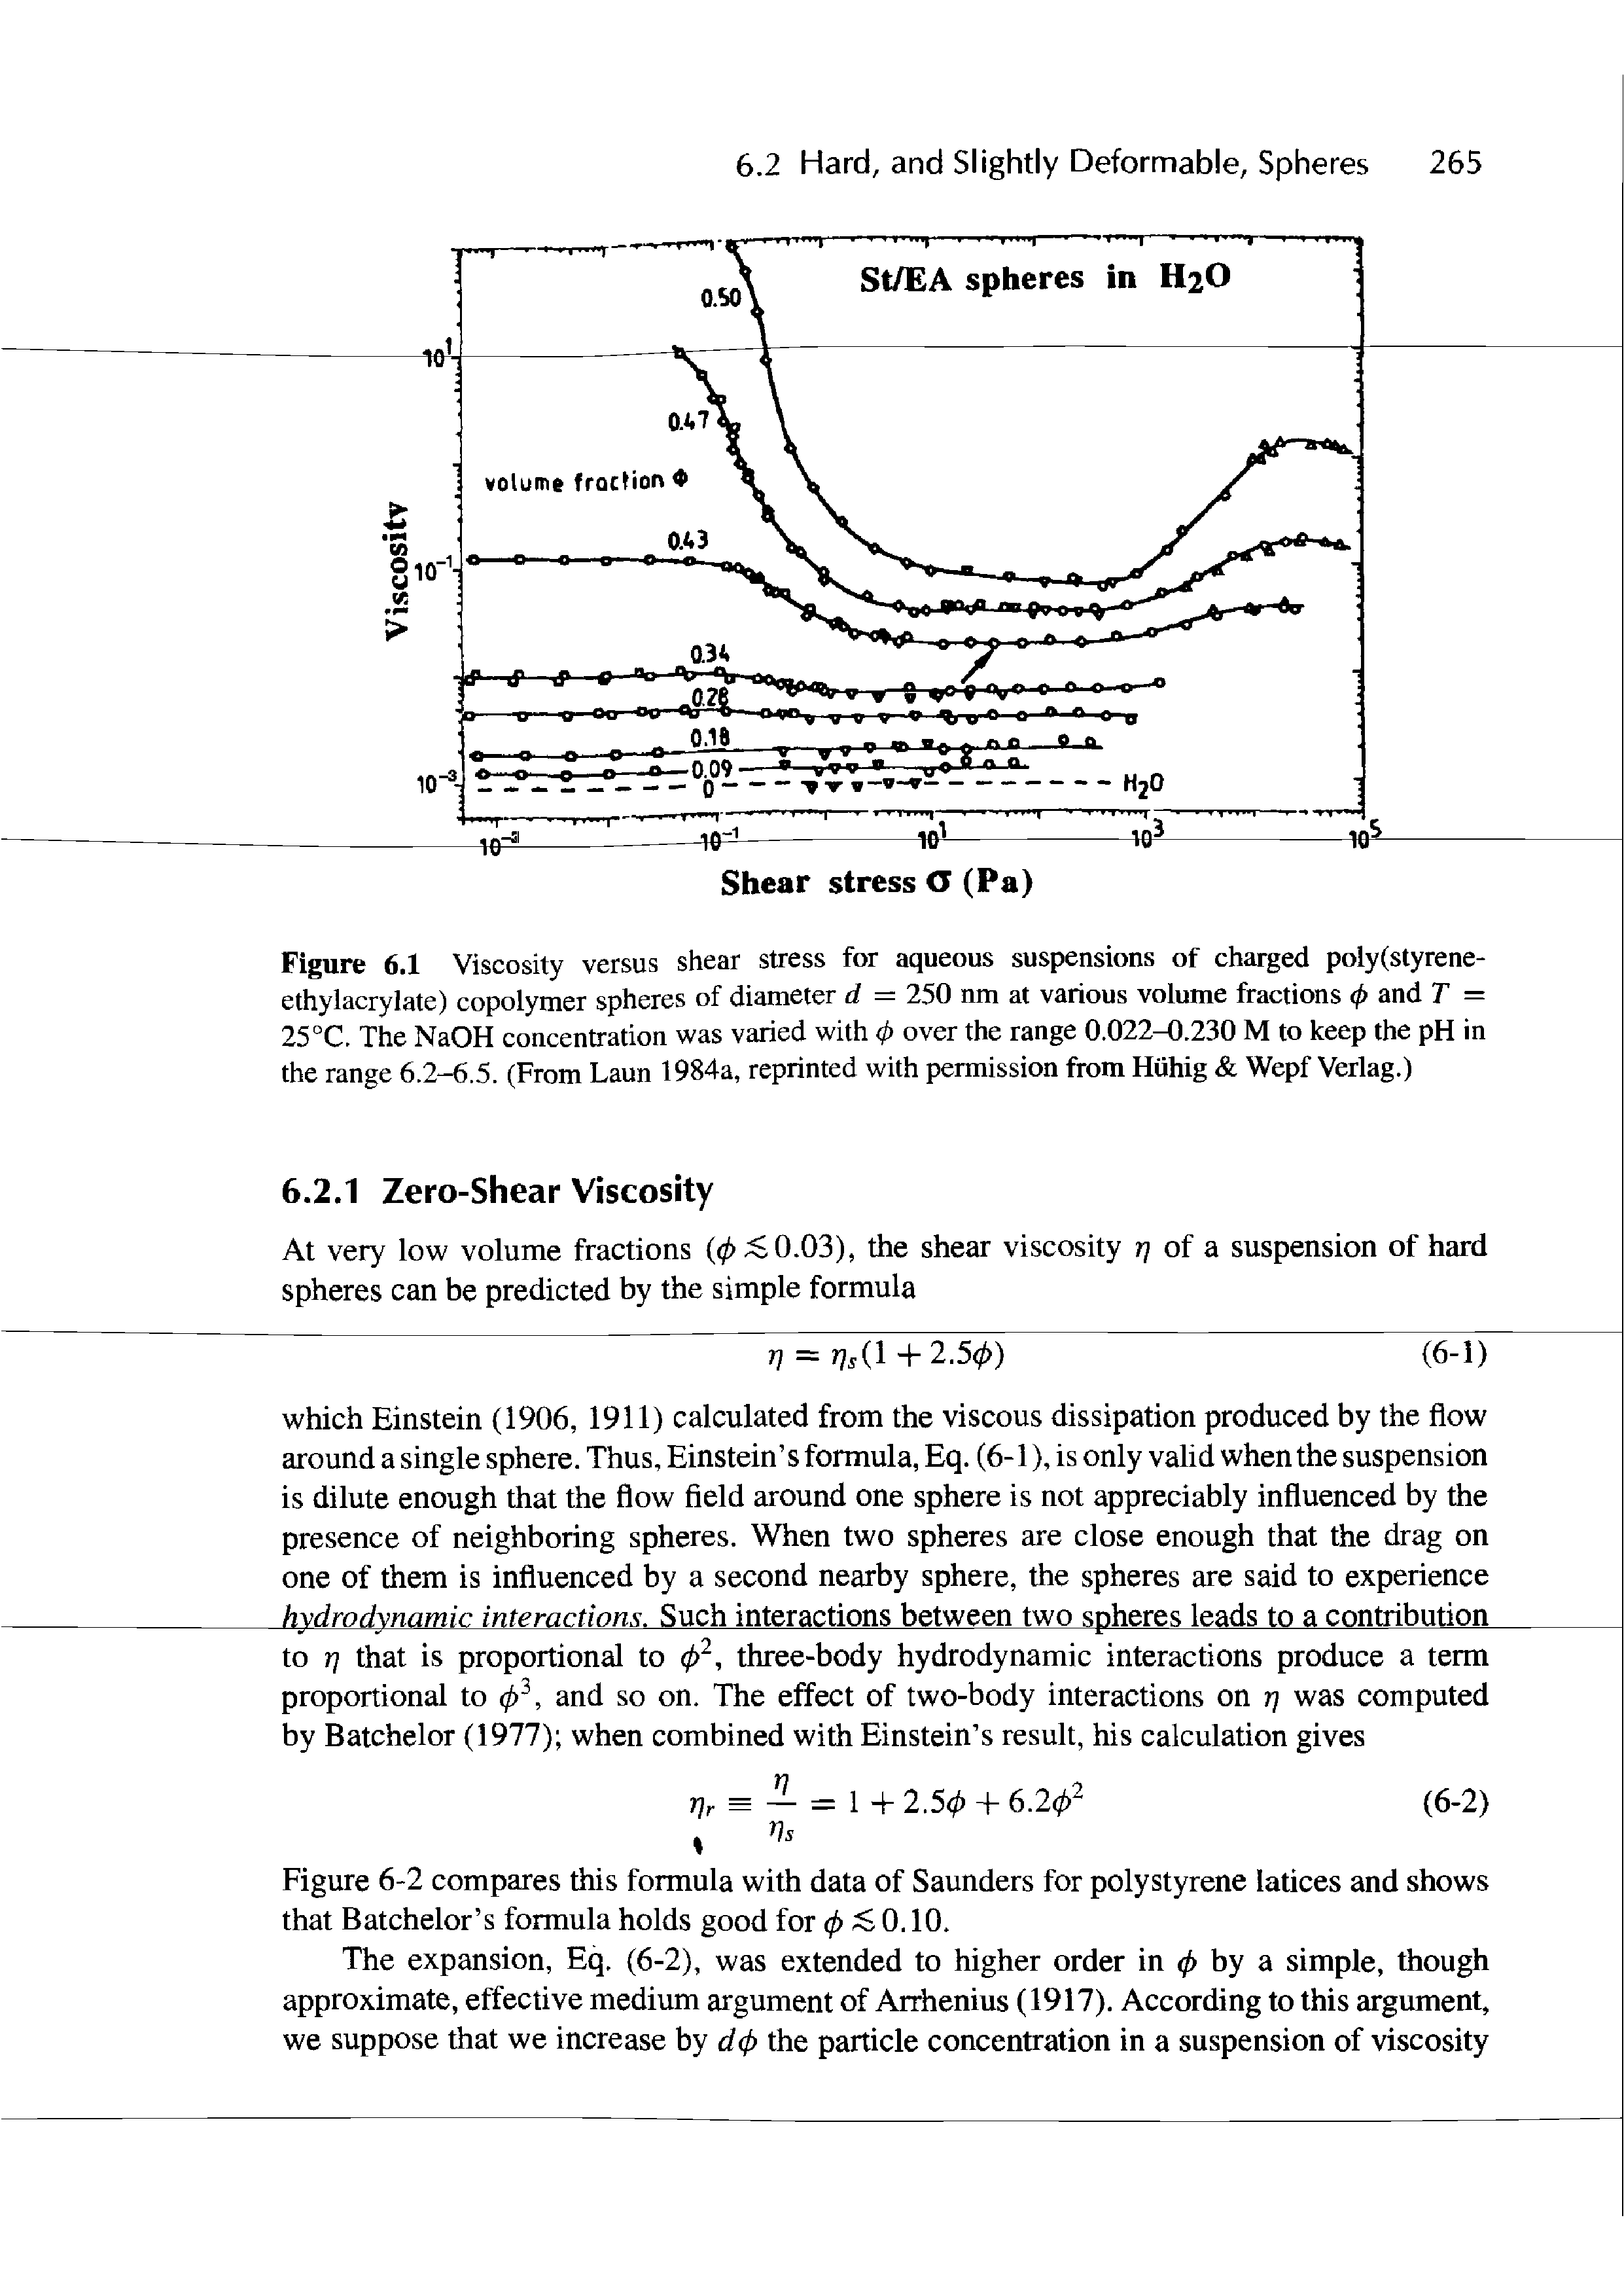 Figure 6.1 Viscosity versus shear stress for aqueous suspensions of charged poly(styrene-ethylacrylate) copolymer spheres of diameter d = 250 nm at various volume fractions 0 and T = 25°C. The NaOH concentration was varied with <p over the range 0.022-0.230 M to keep the pH in the range 6.2-6.5. (From Laun 1984a, reprinted with permission from Huhig Wepf Verlag.)...